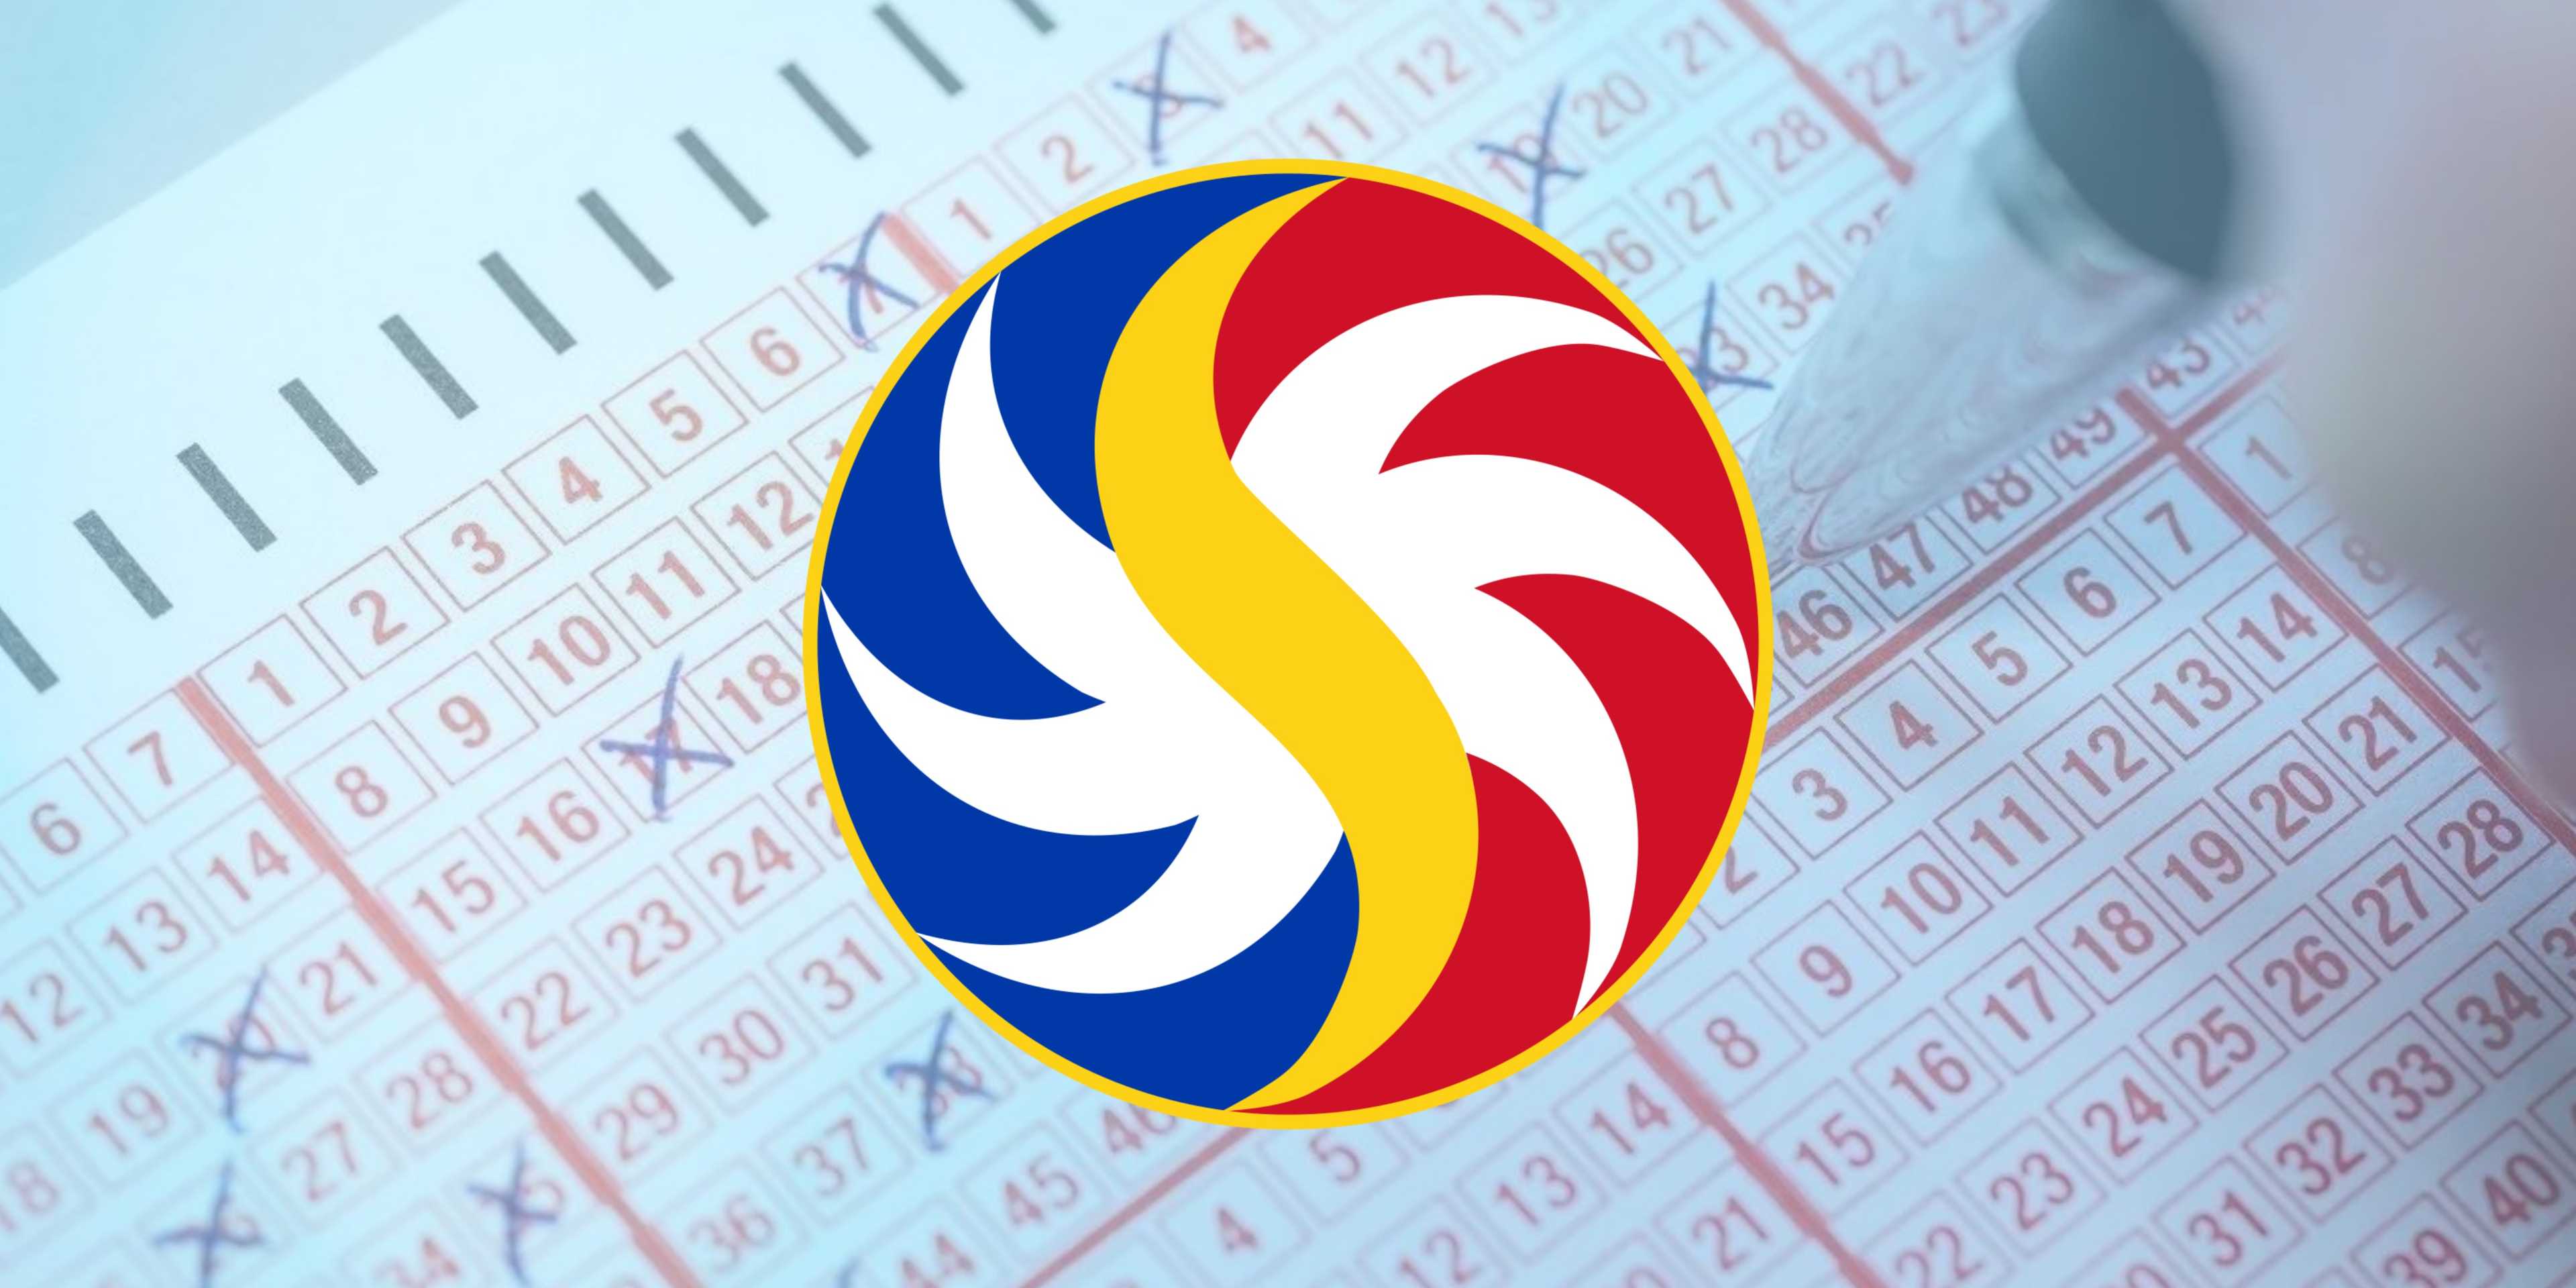 PCSO Lotto Draw Results on Friday, March 8